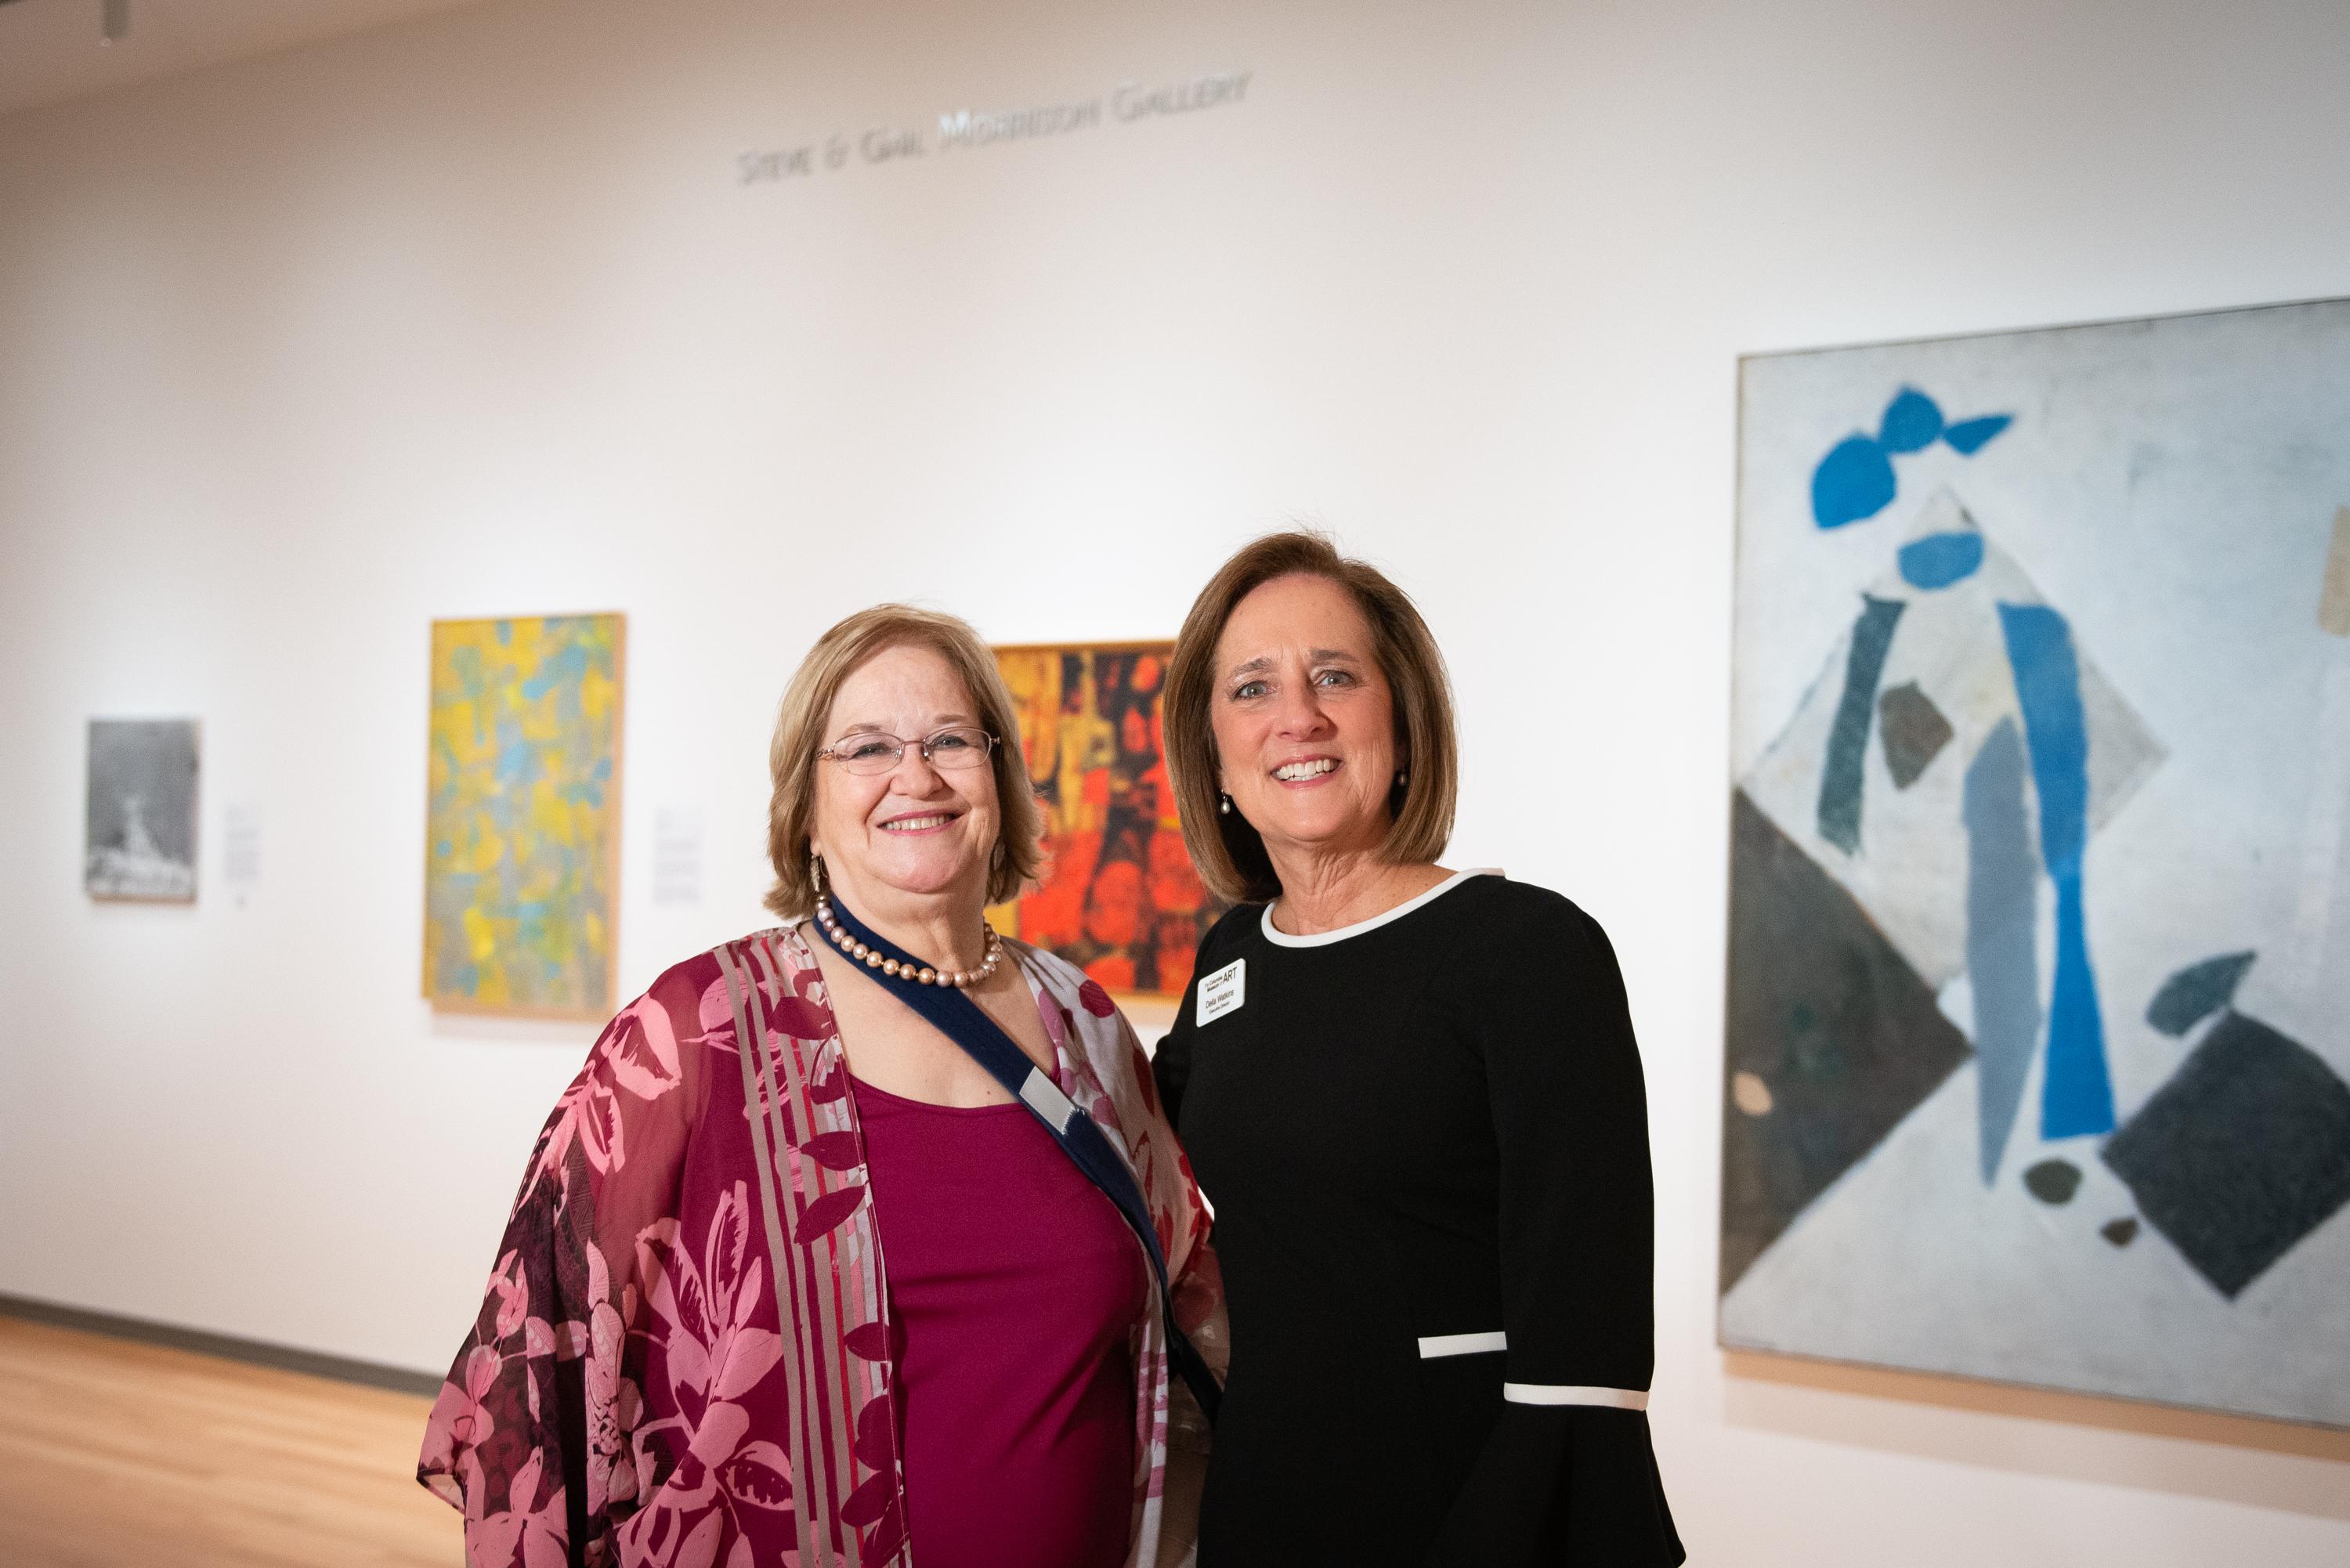 Two women, Dr. Gail Morrison and Della Watkins, smiling in front of a gallery wall hung with contemporary abstract paintings.